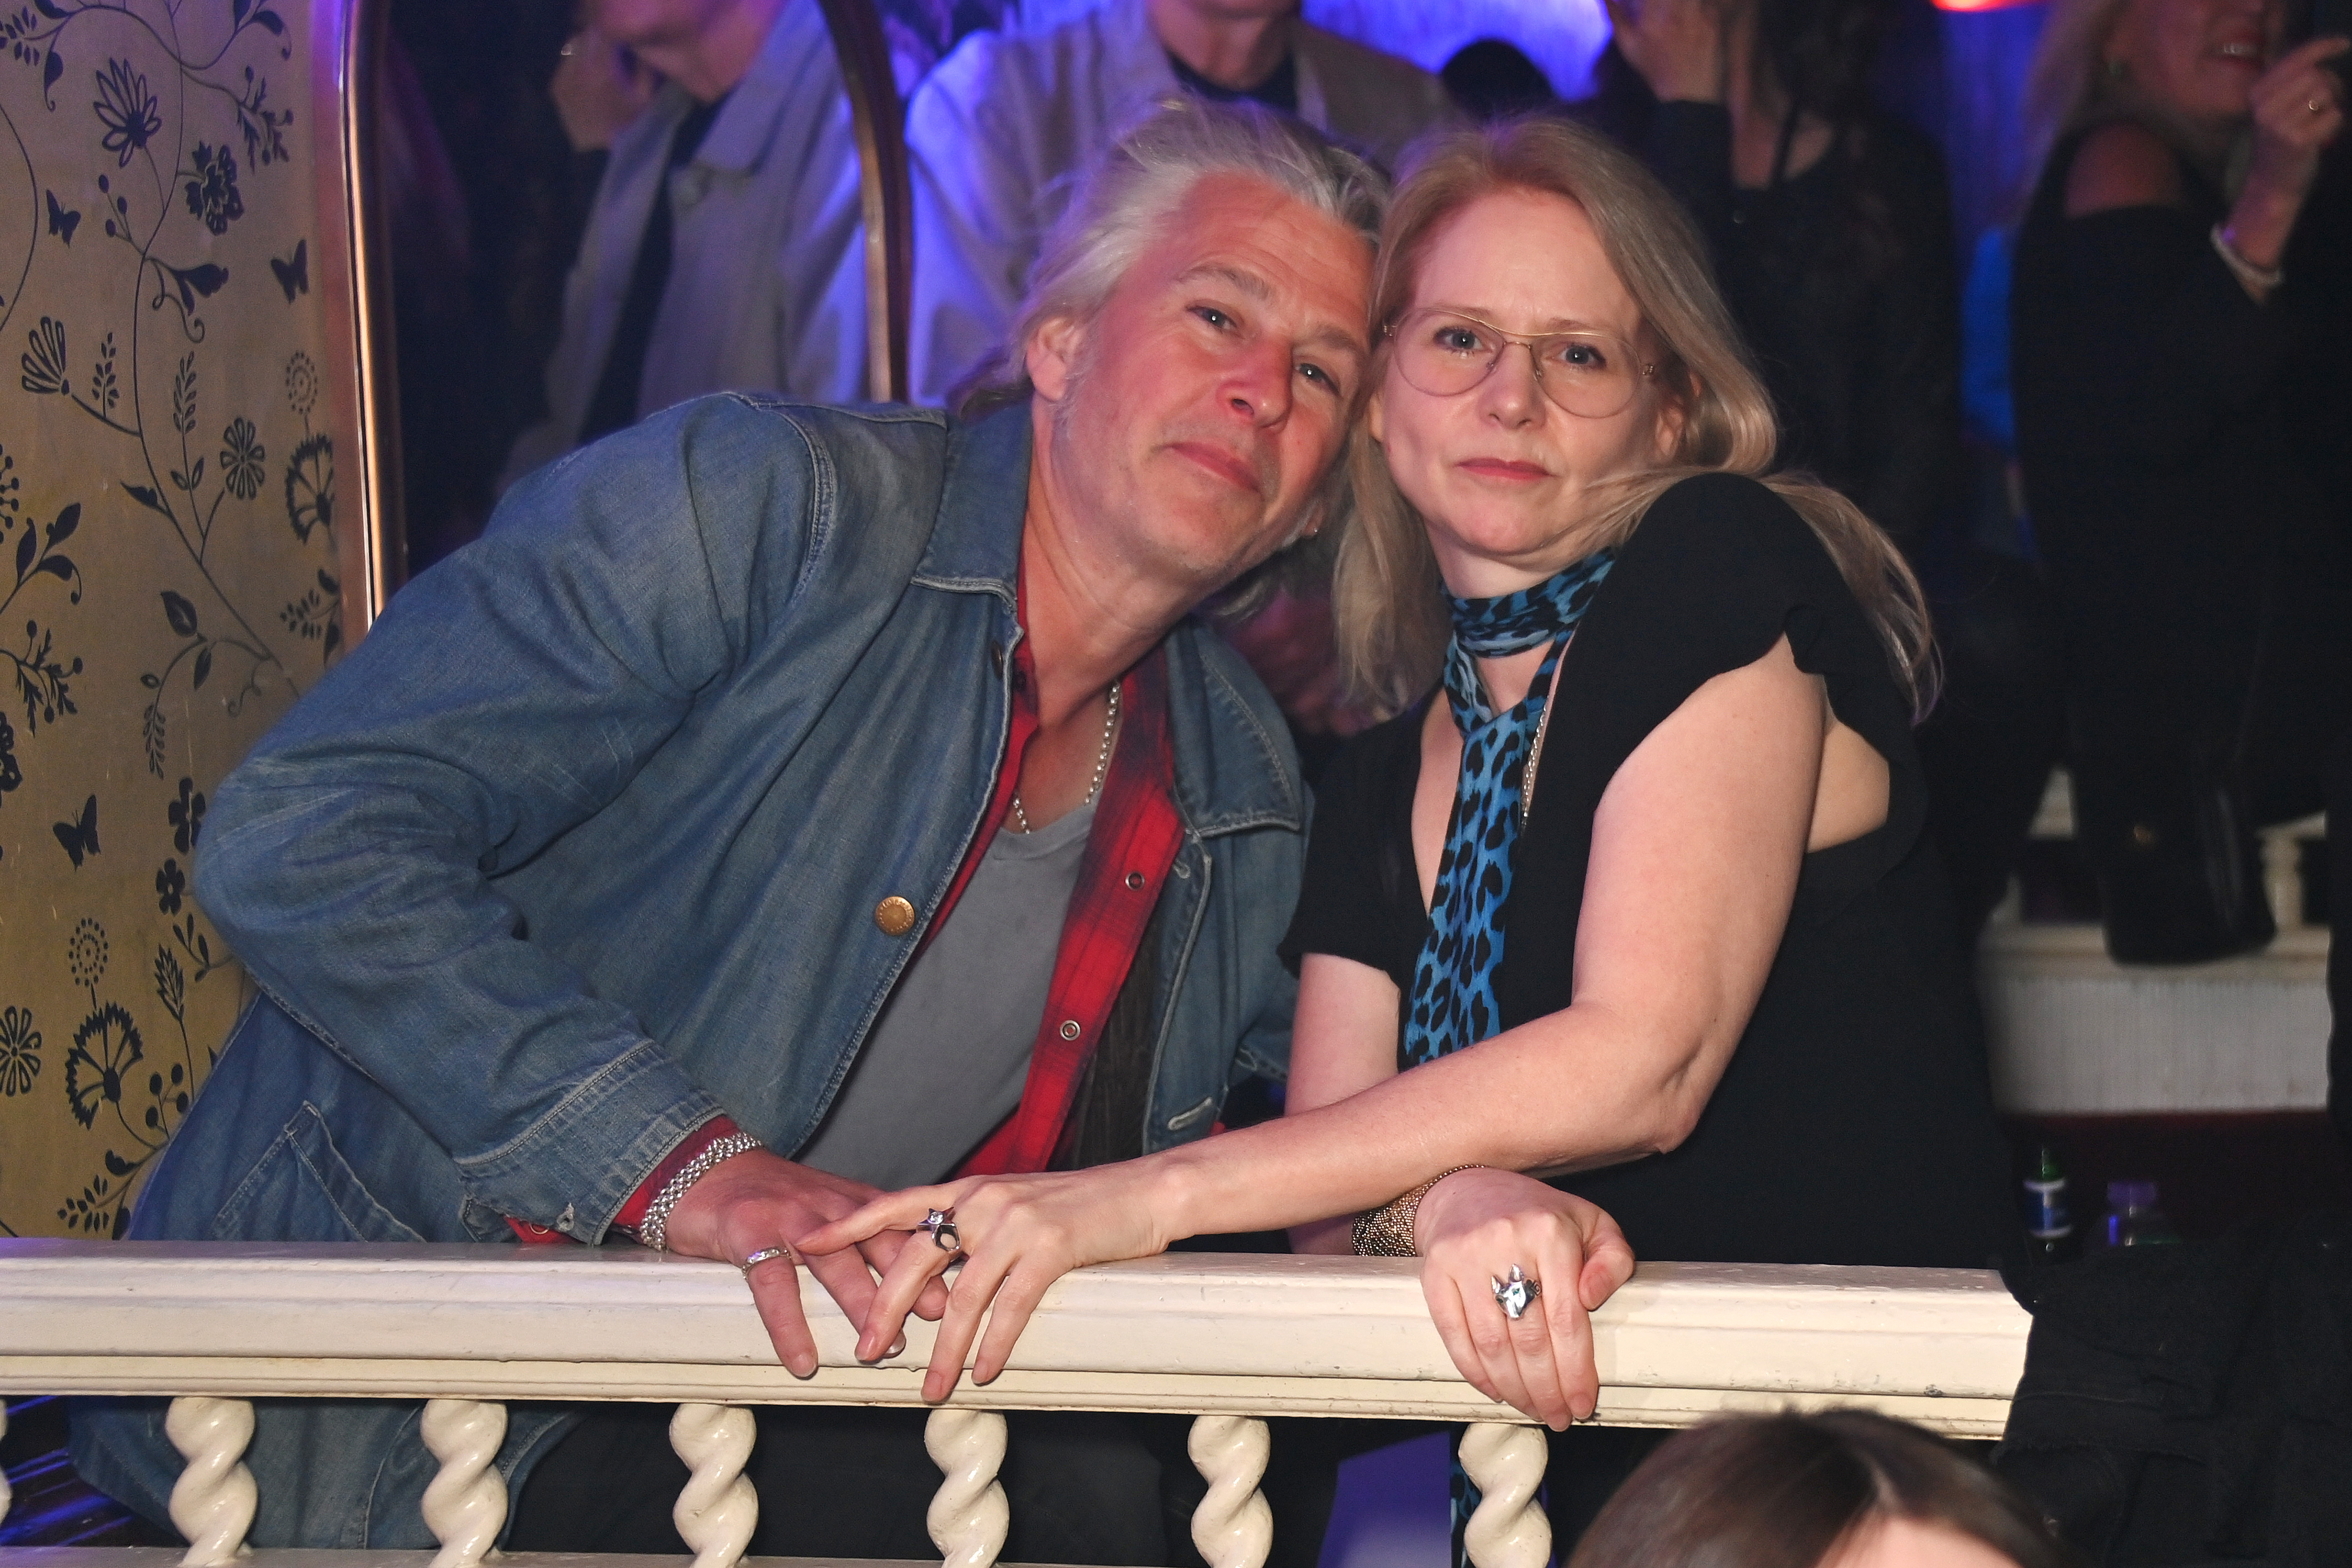 Jason and Lee Starkey at the "Manta of the Cosmos" performance at The Box on June 5, 2023, in London, England | Source: Getty Images